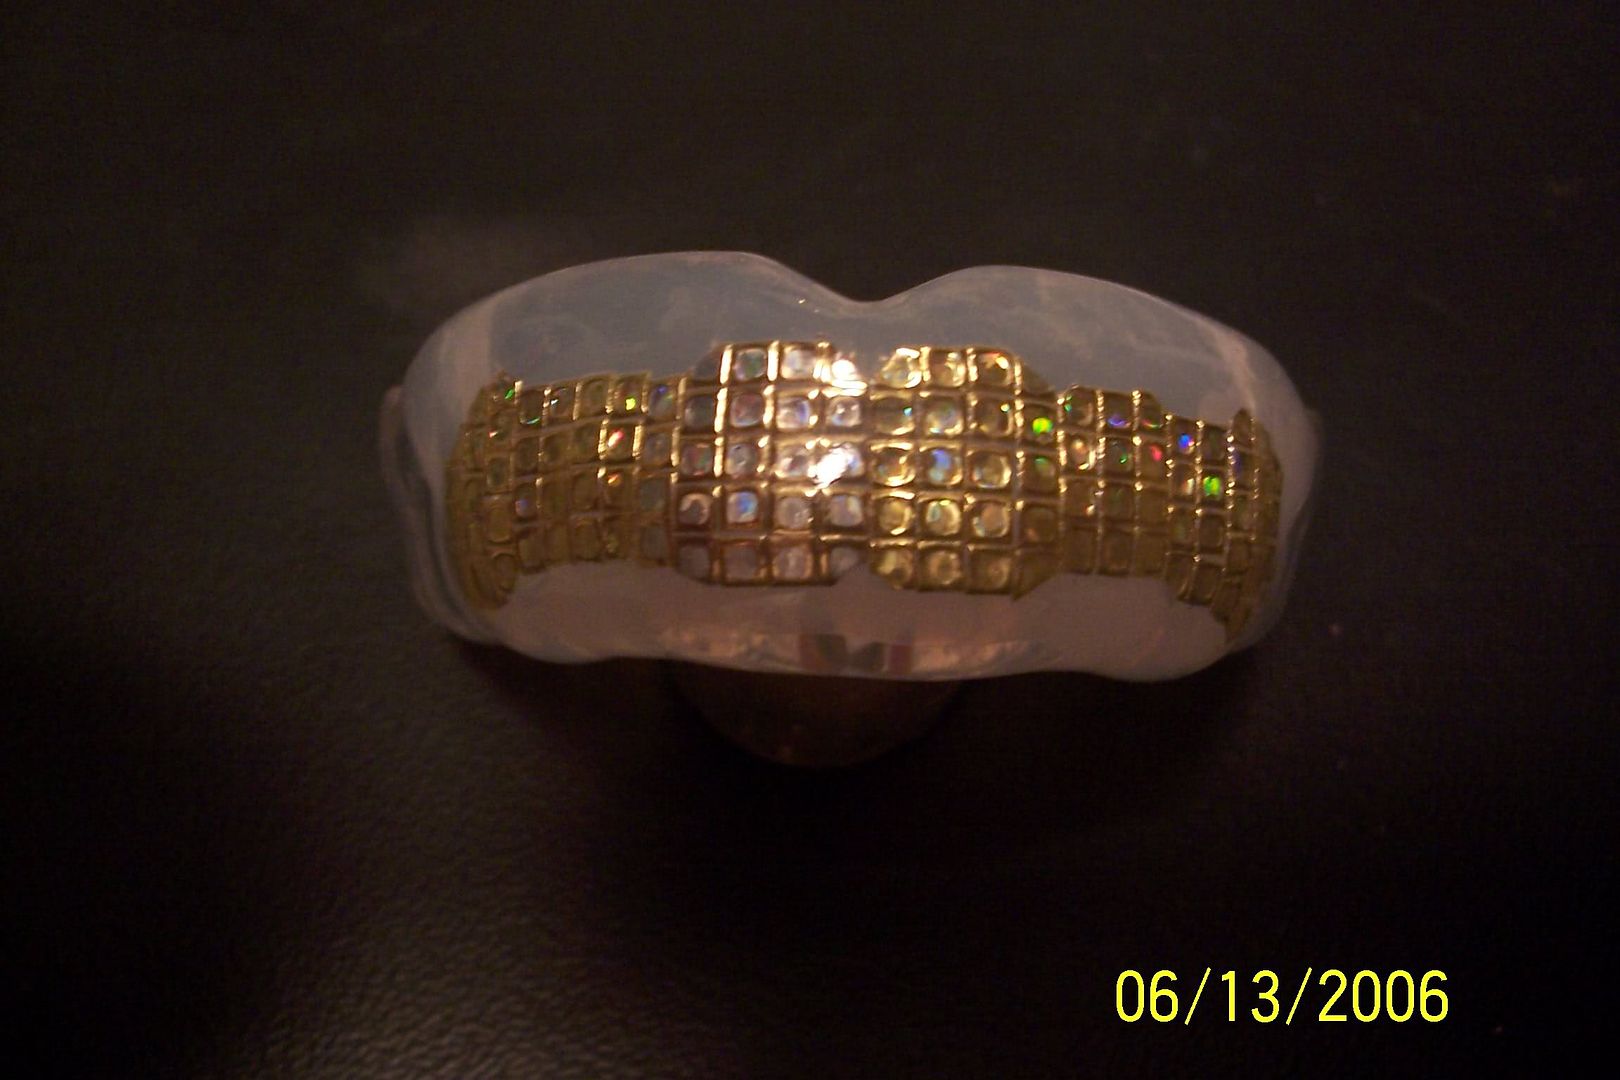 Pretty Mouth Grill http://forums.sherdog.com/forums/f16/opinion 